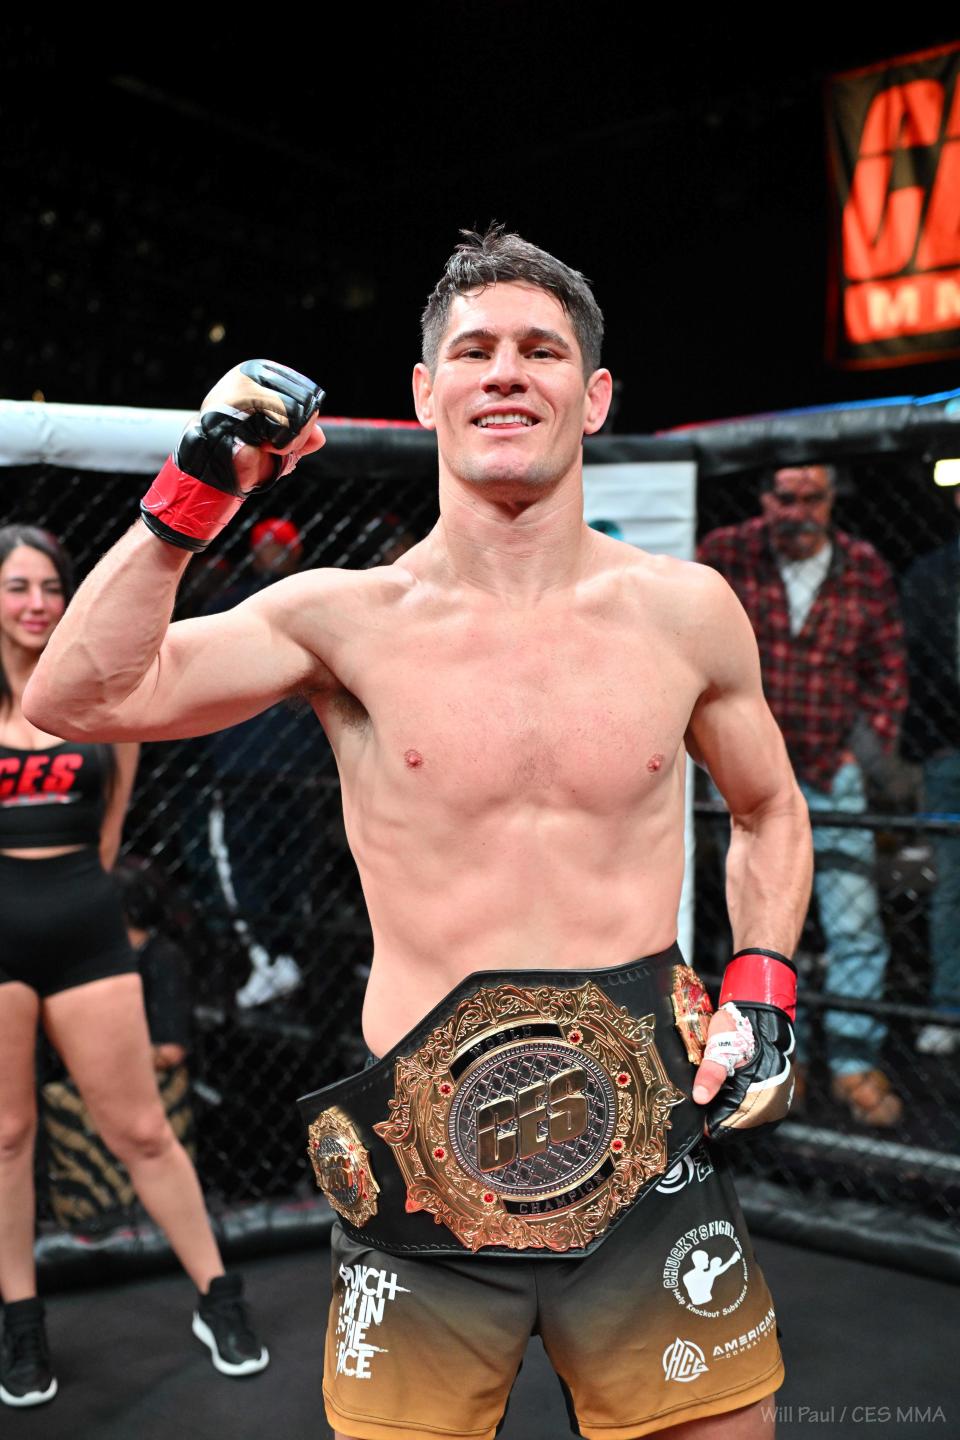 Charles “Boston Strong” Rosa won the Classic Entertainment and Sports (CES) world championship lightweight title, defeating Josh “Hook On” Harvey in the first round.